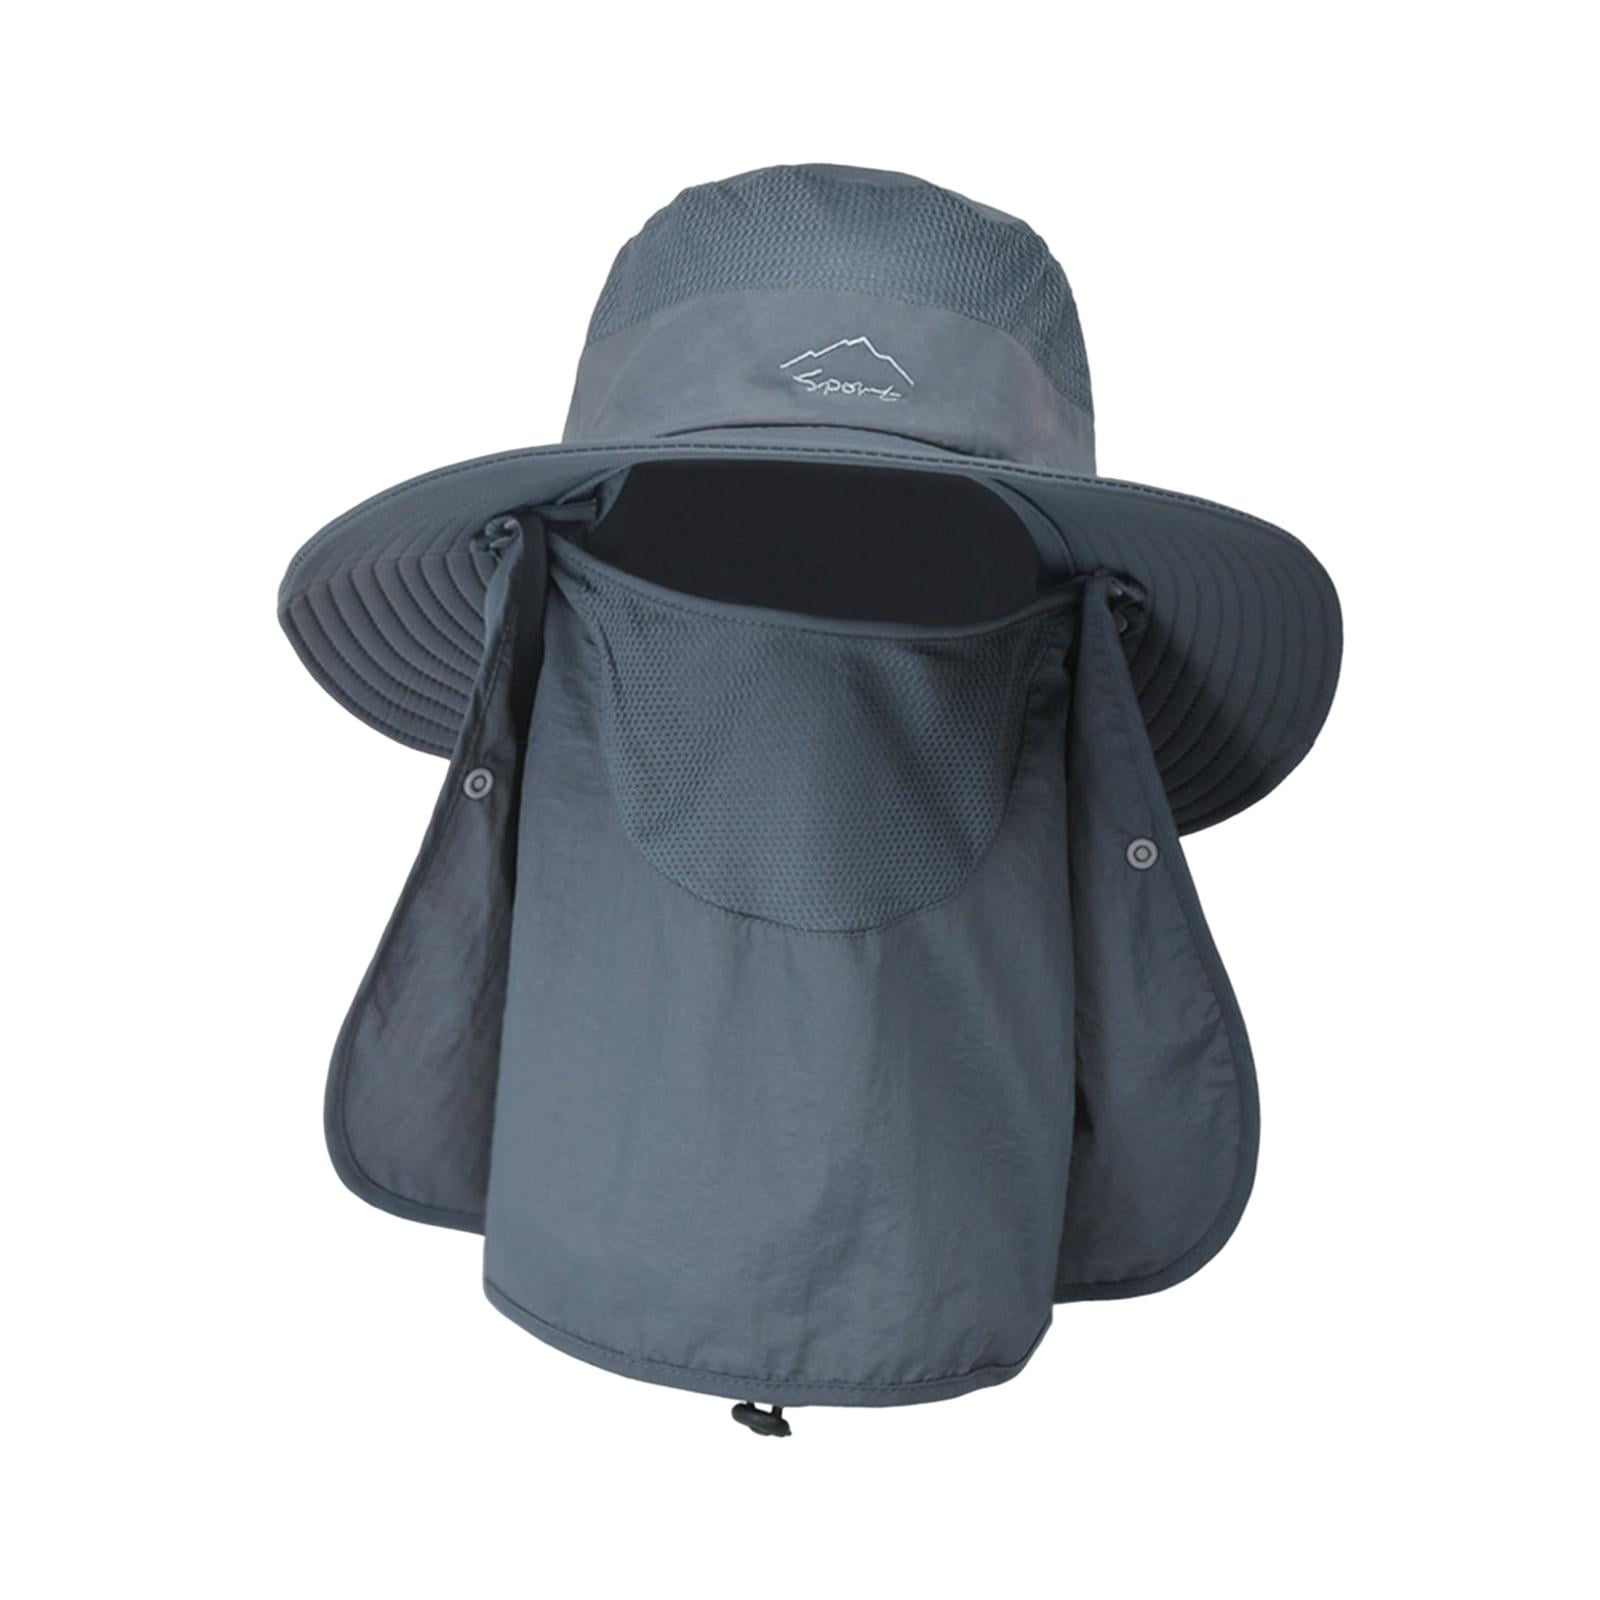 Sun Hats Neck Cover and Mesh Breathable Bucket Hat with Strings